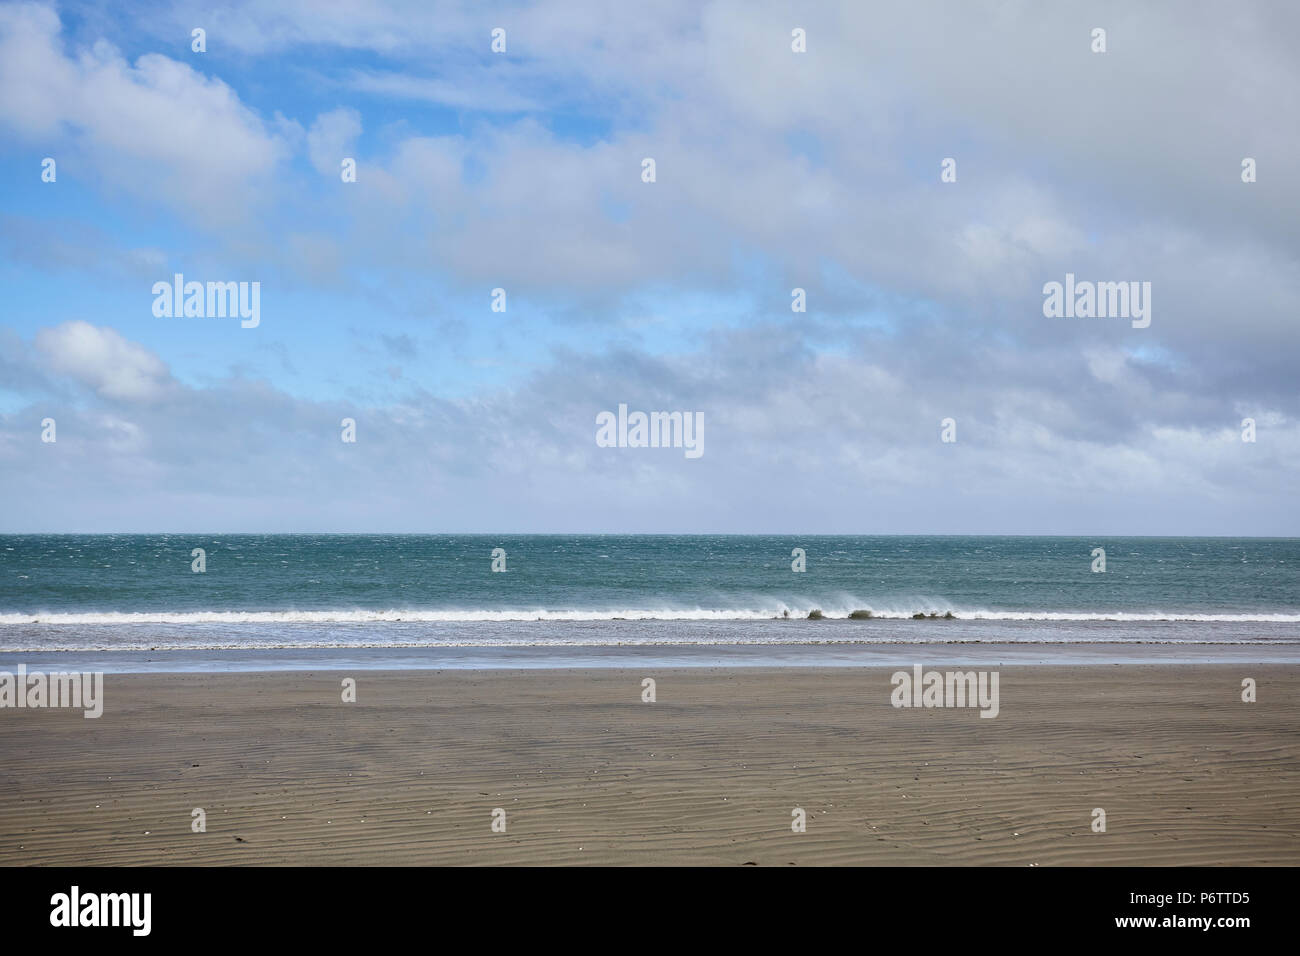 View from a beach on the west coast of New Zealand looking out to the Tazman Sea as a wave breaks on to the shore Stock Photo